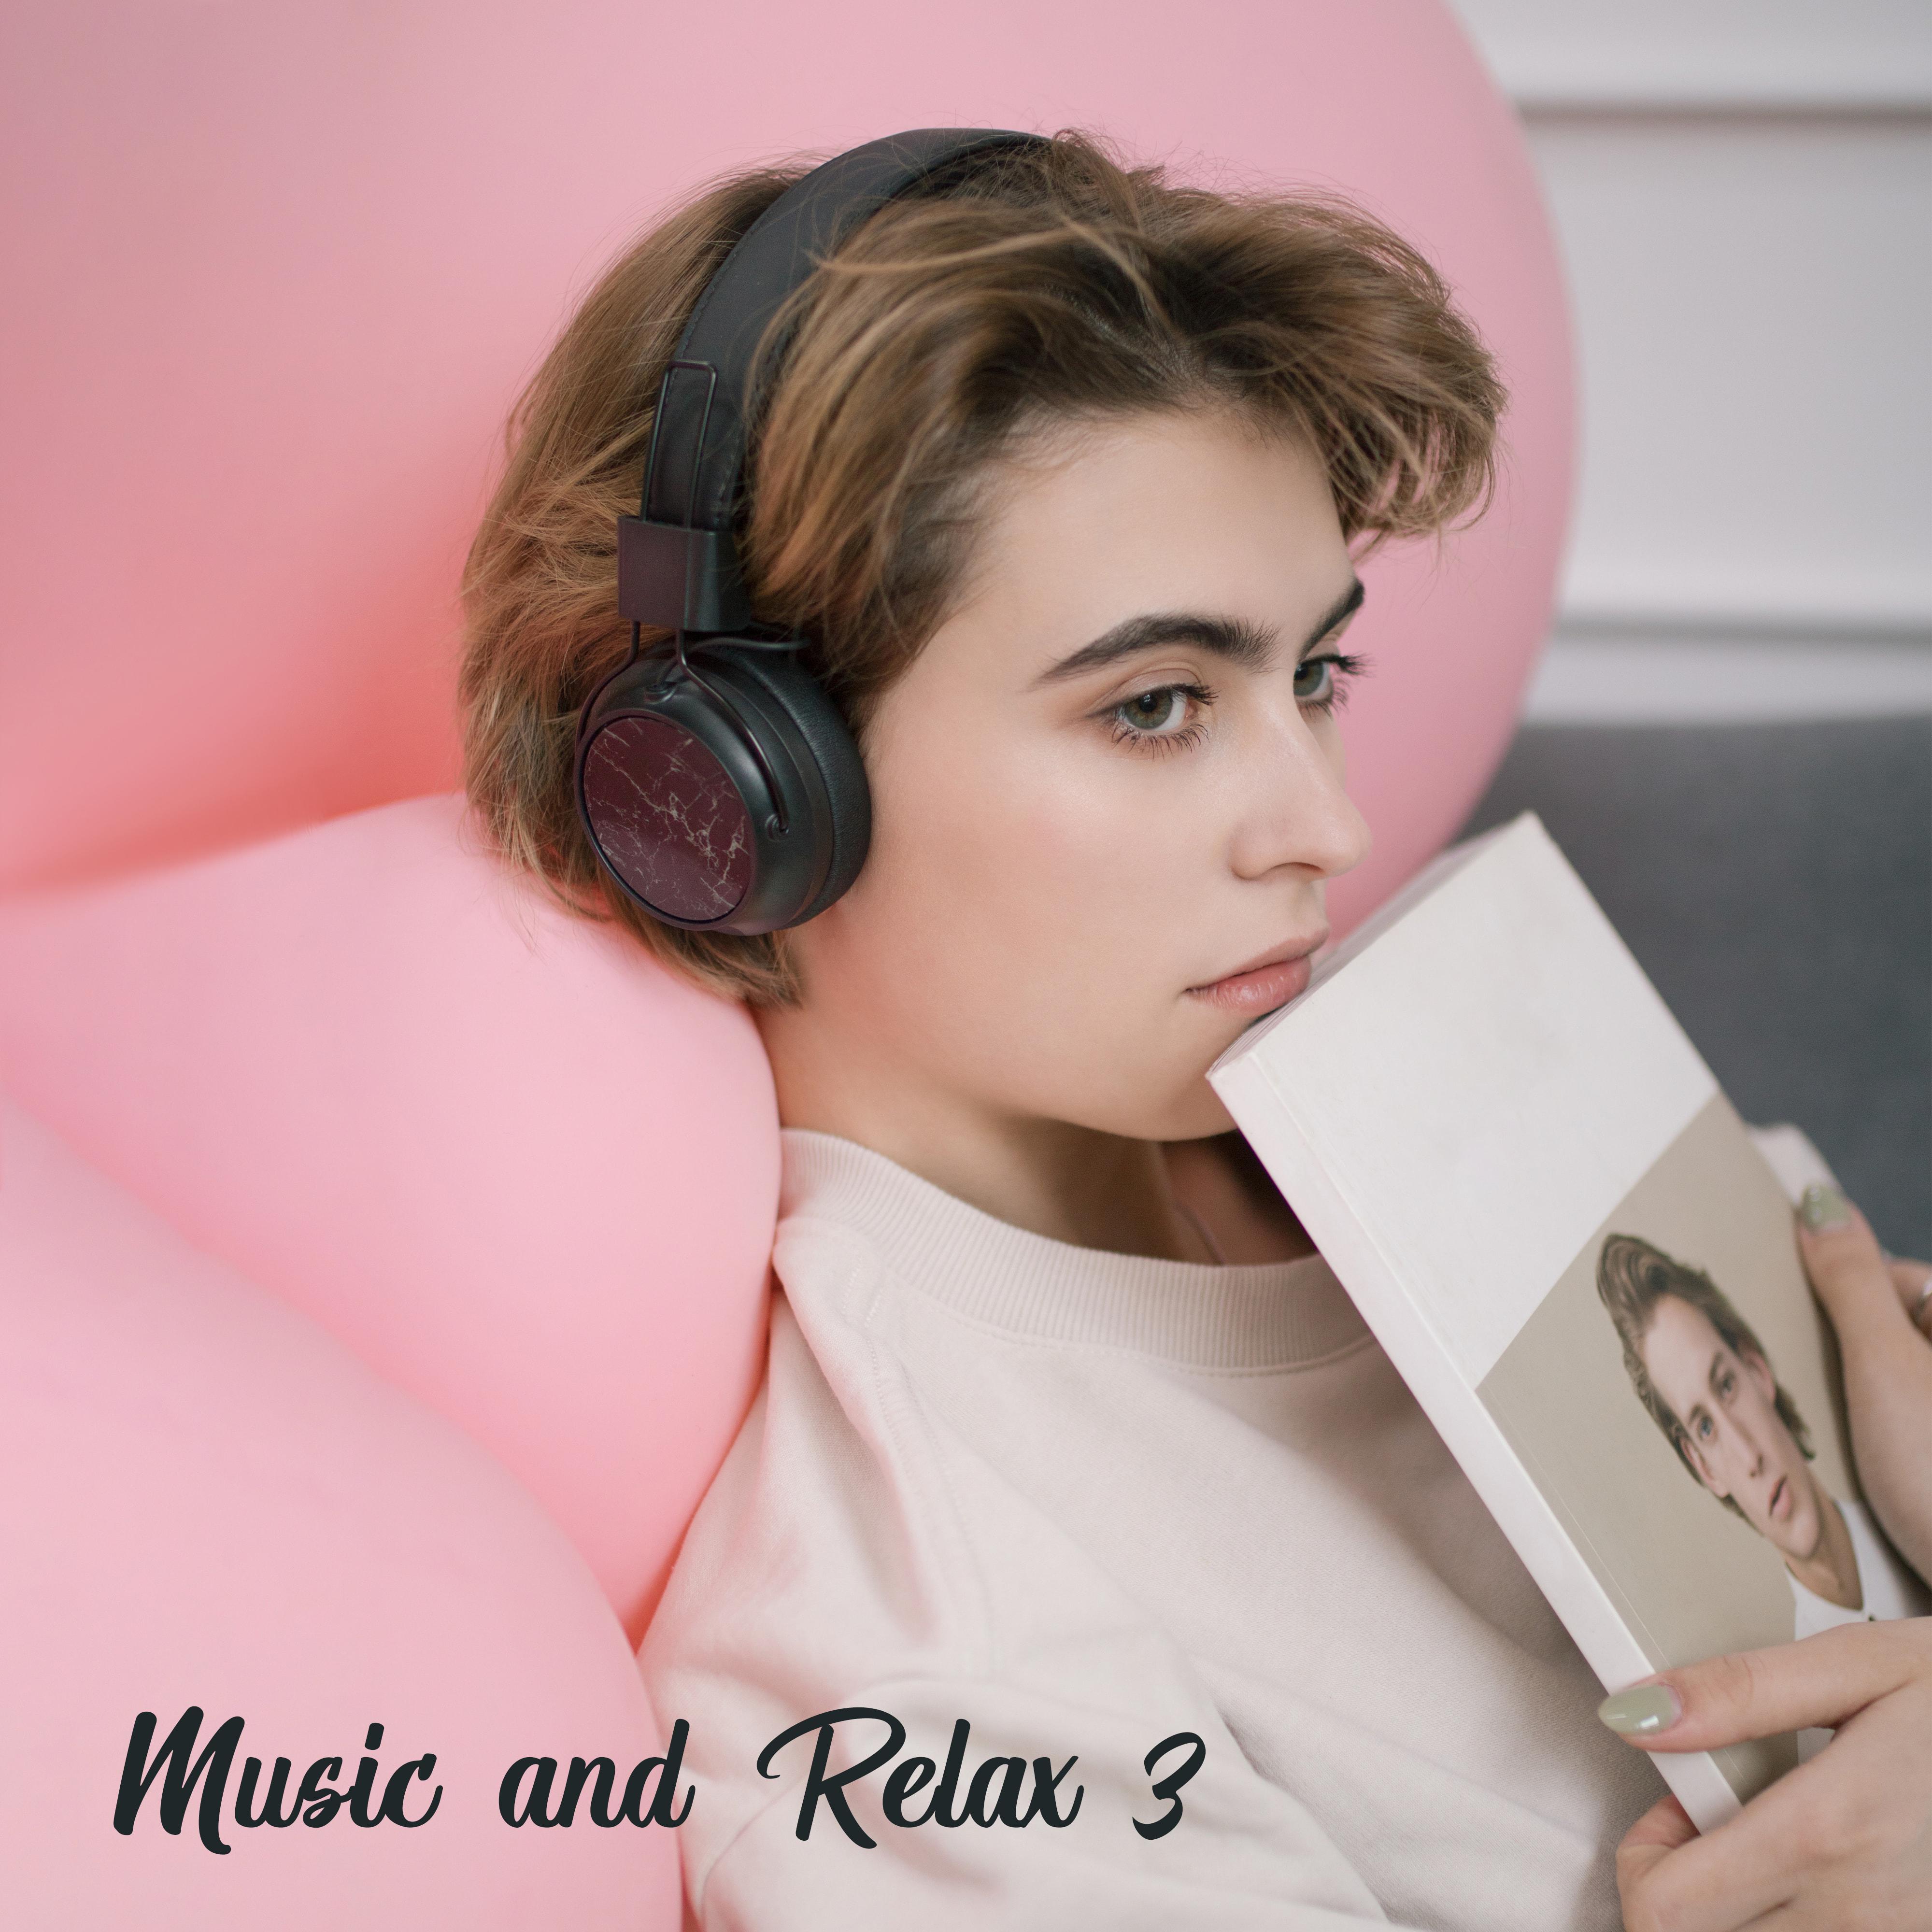 Music and Relax 3